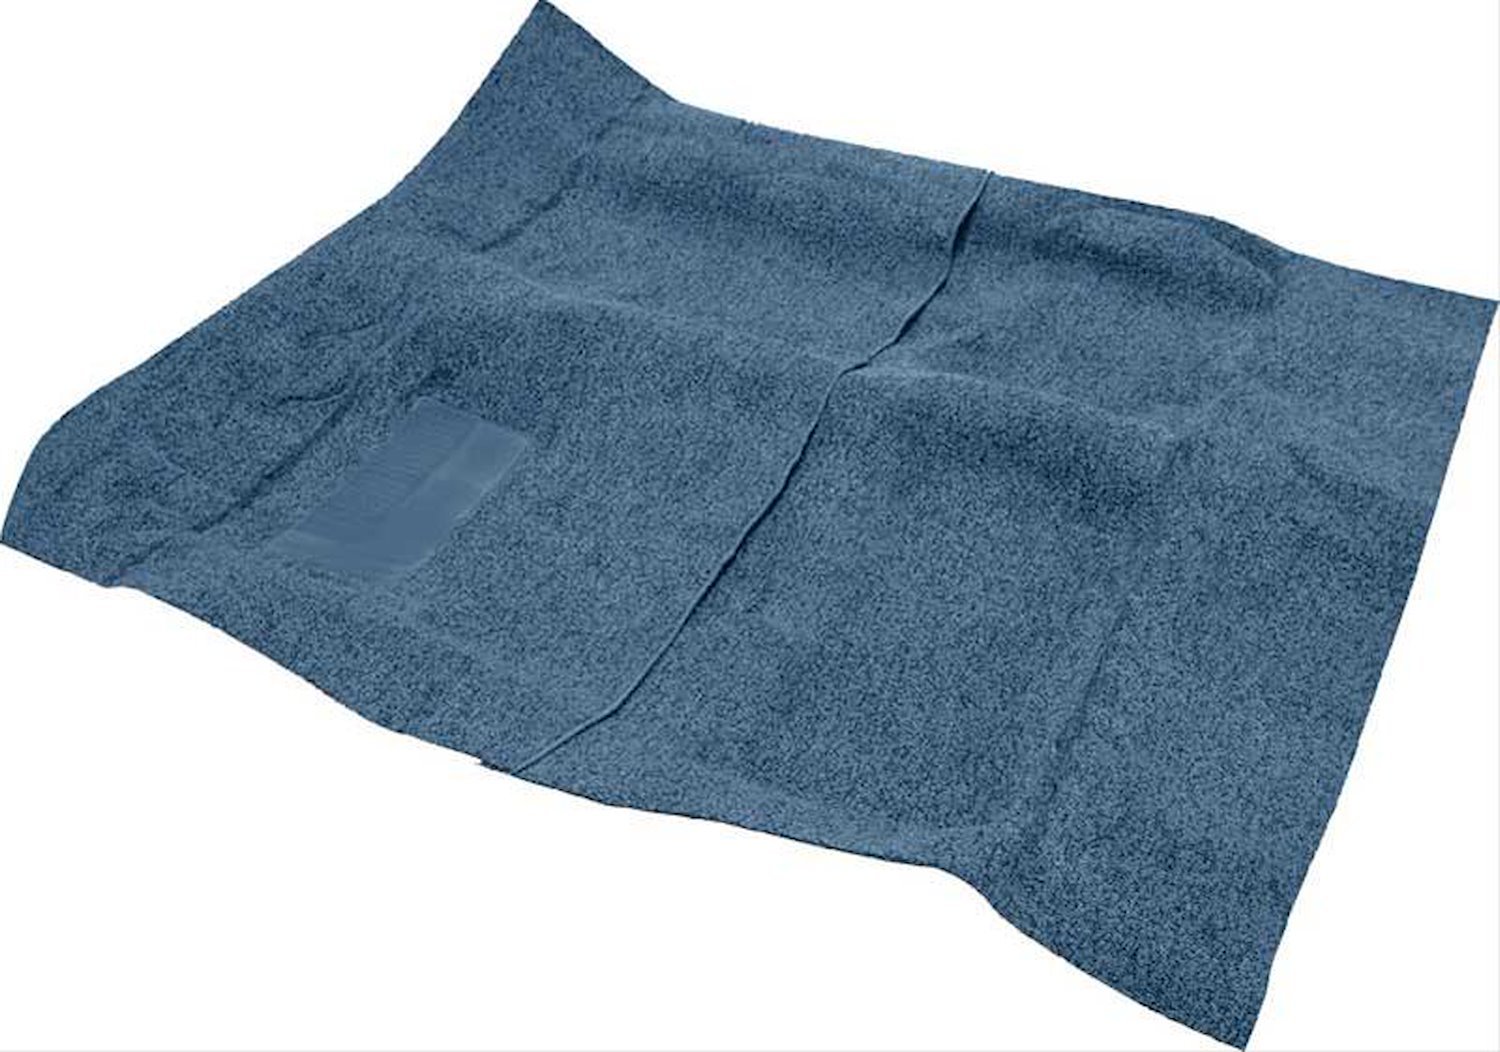 MA545818 Cut Pile Carpet 1974-76 Dodge Dart Sport/Plymouth Duster 2-Door With 4-Speed Ocean Blue